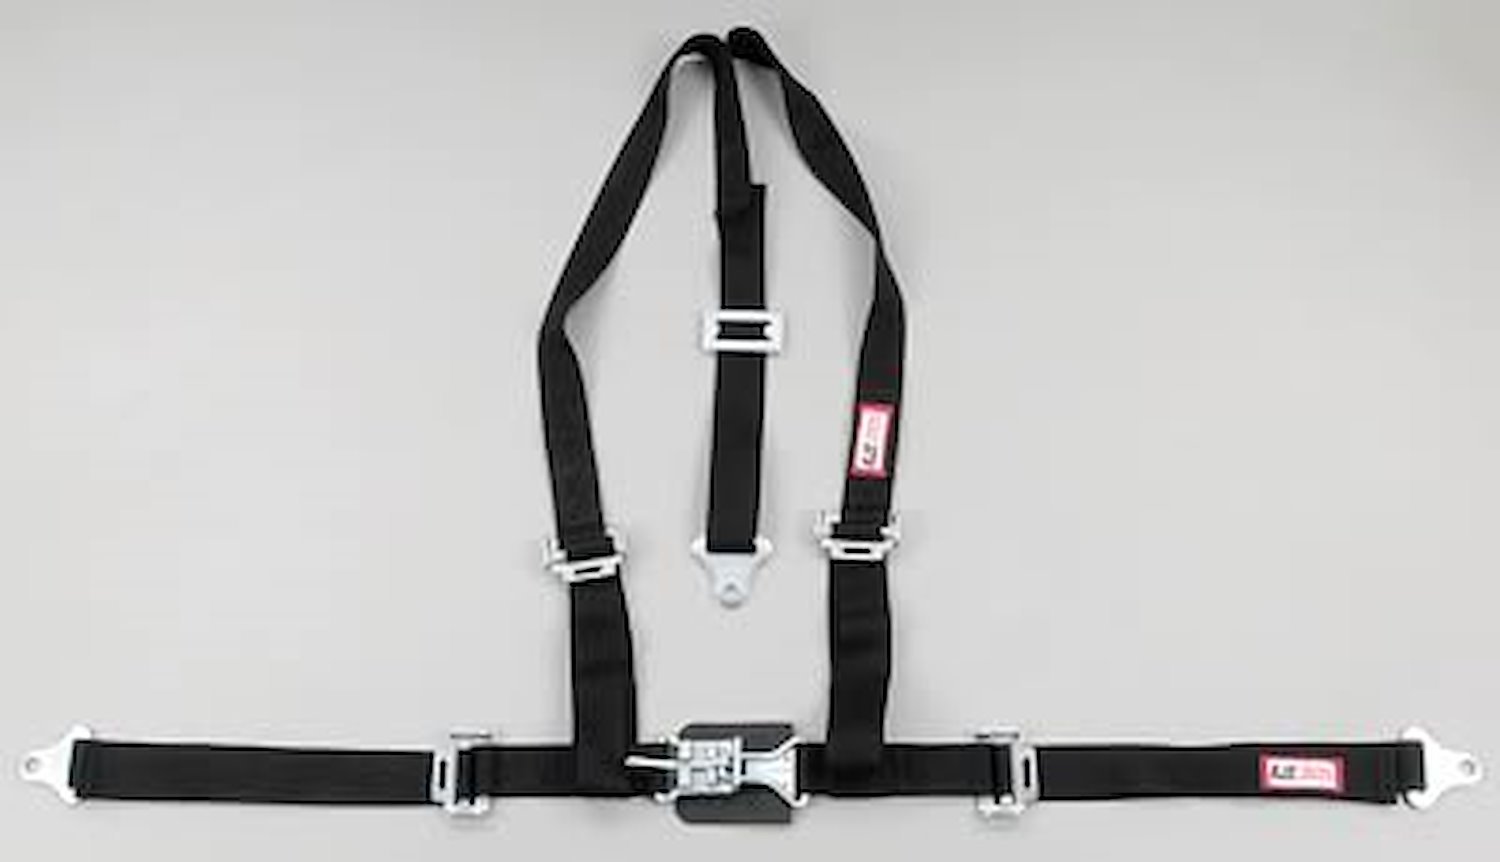 NON-SFI L&L HARNESS 2 PULL UP Lap Belt w/Adjuster SNAP 2 S.H. Y FLOOR MOUNT w/STERNUM STRAP WRAP/BOLT YELLOW